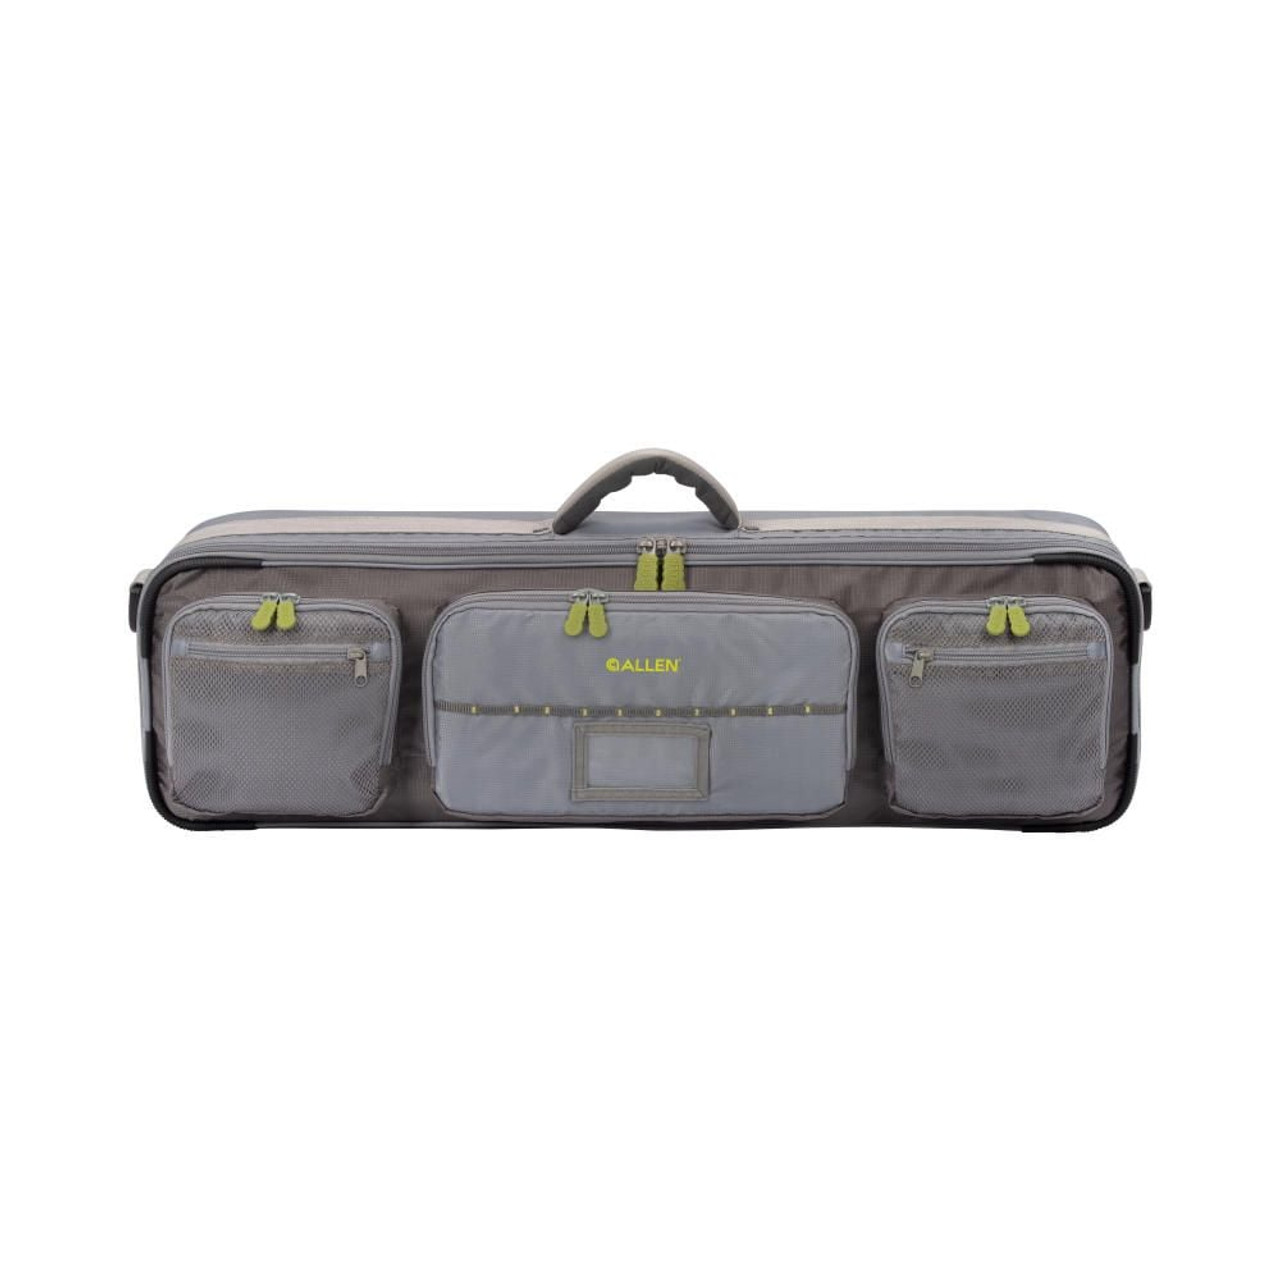 Allen Cottonwood Fly Fishing Rod & Gear Bag Case Gray 6379 - Online  Outfitters